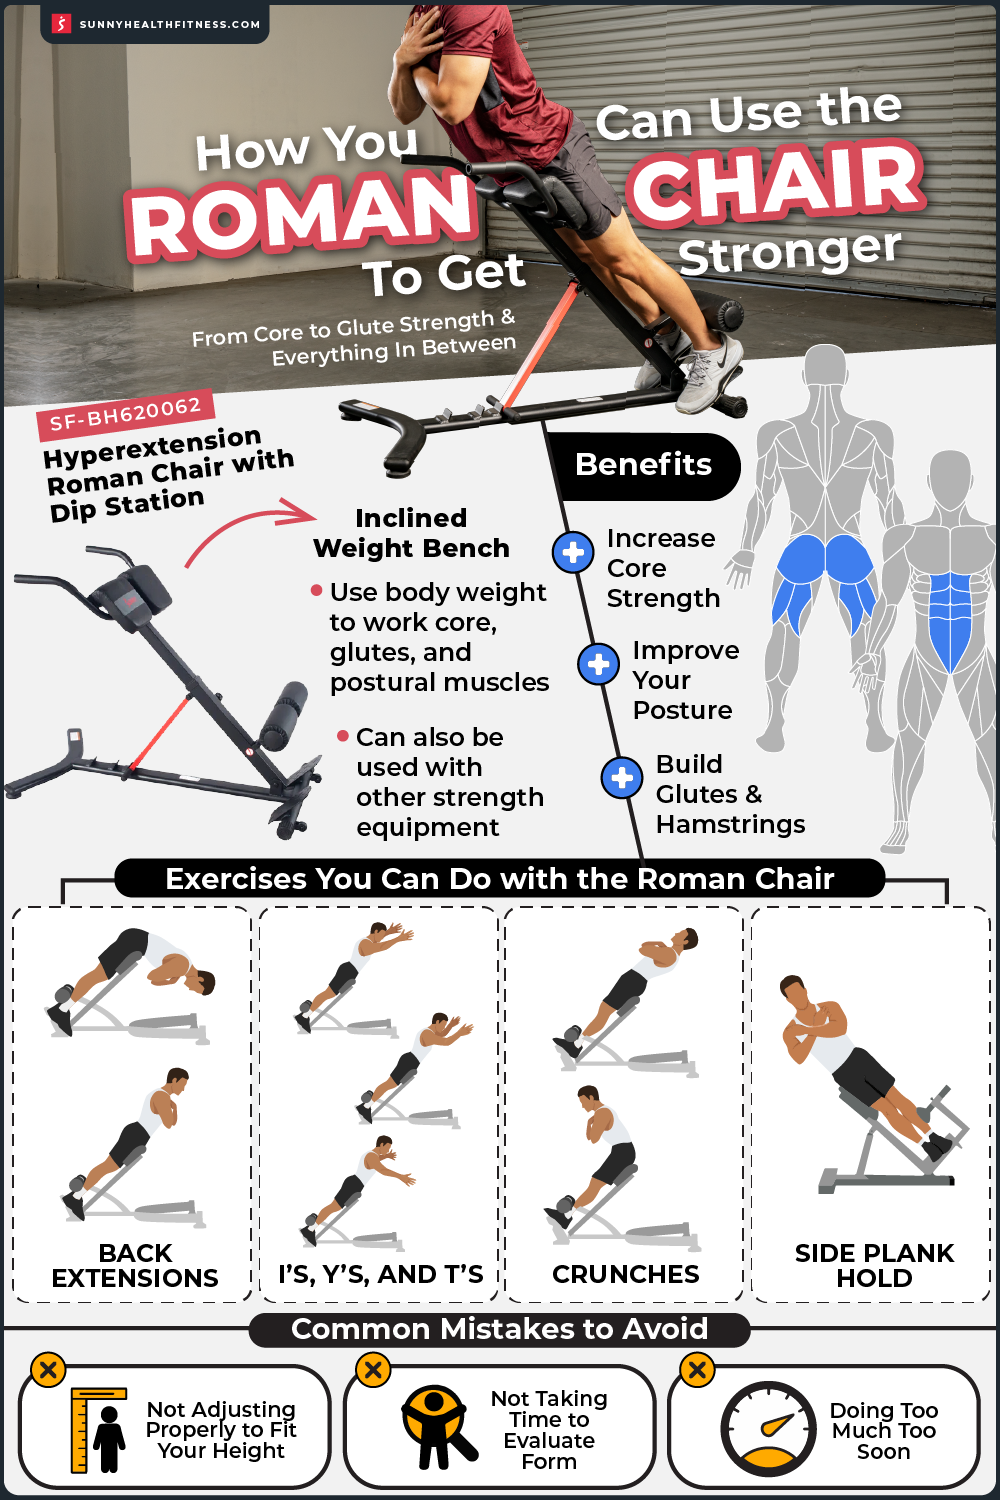 How You Can Use the Roman Chair to Get Stronger - From Core to